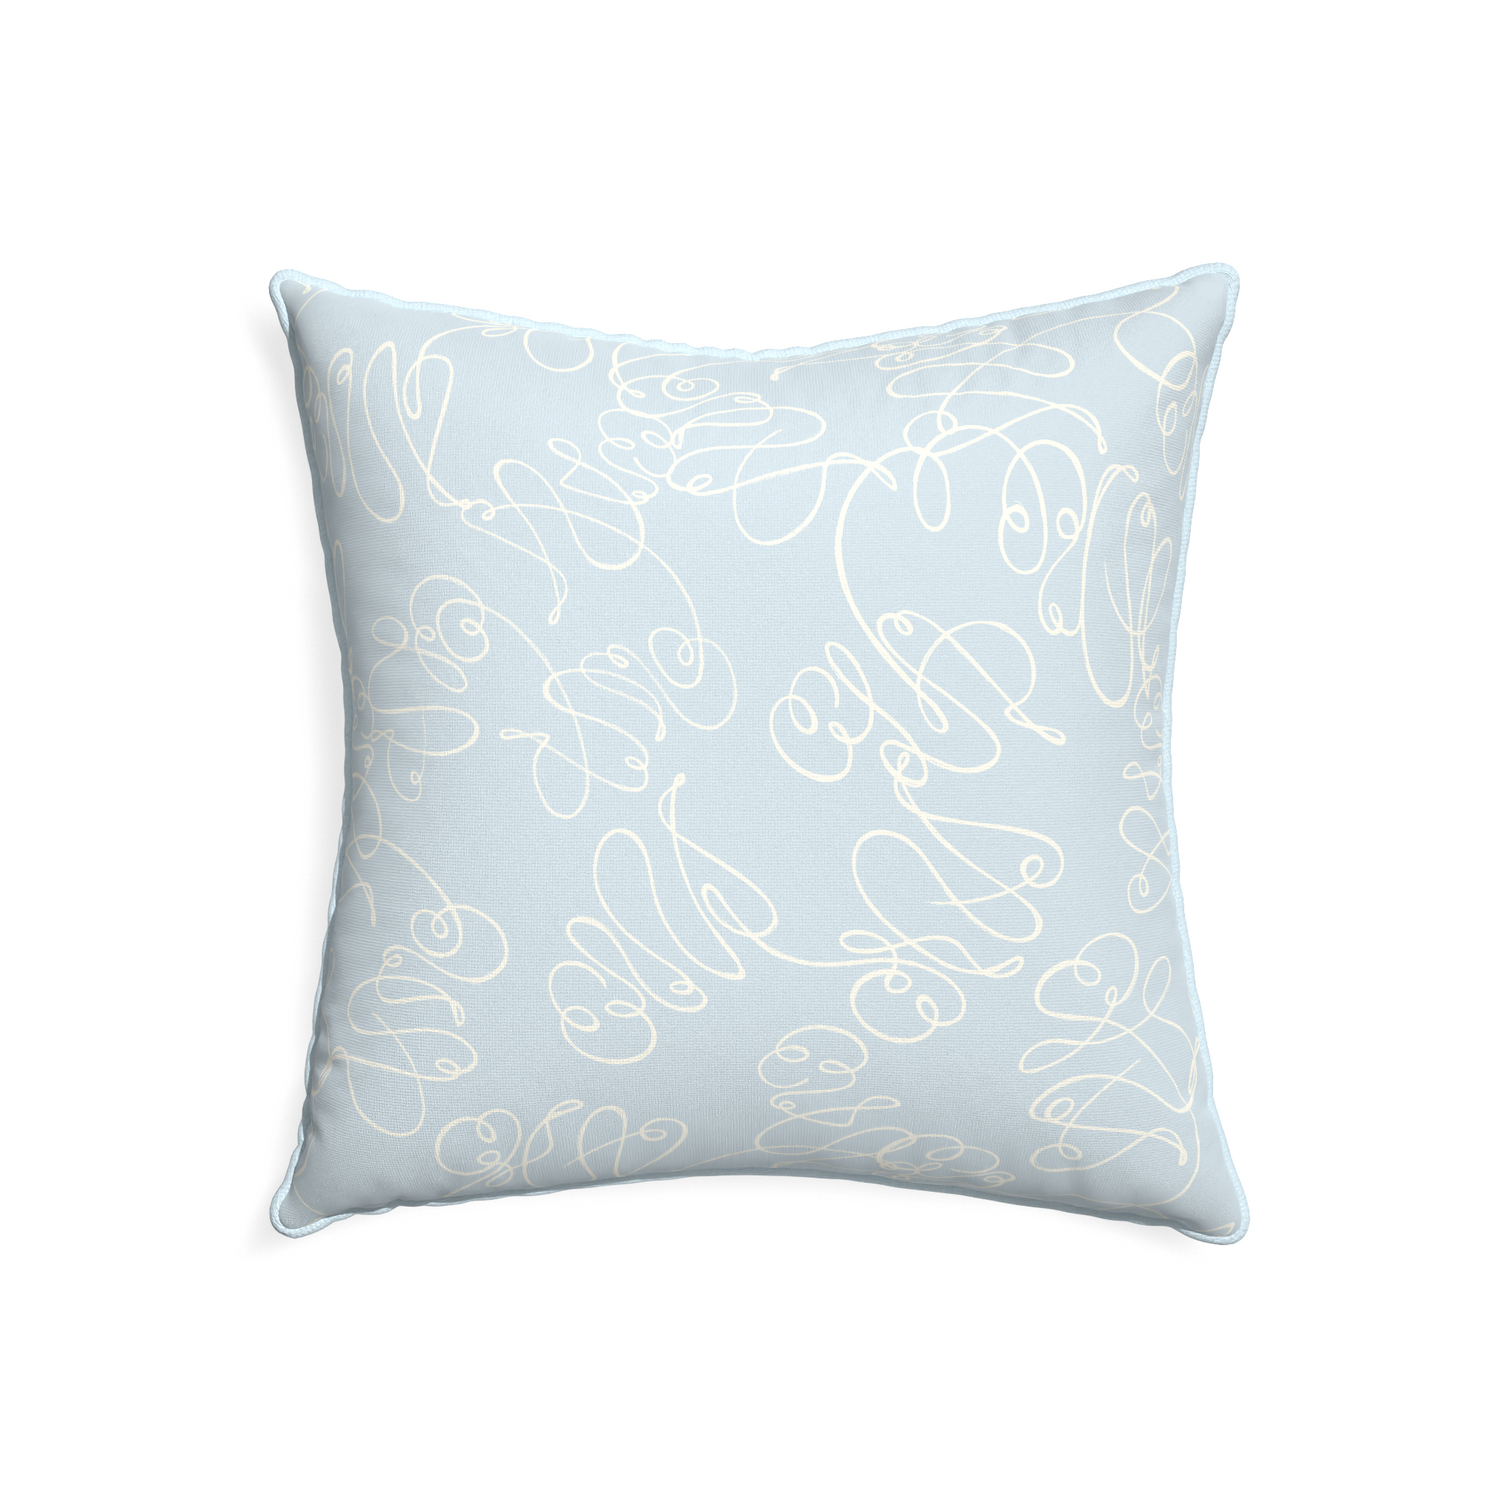 22-square mirabella custom pillow with powder piping on white background